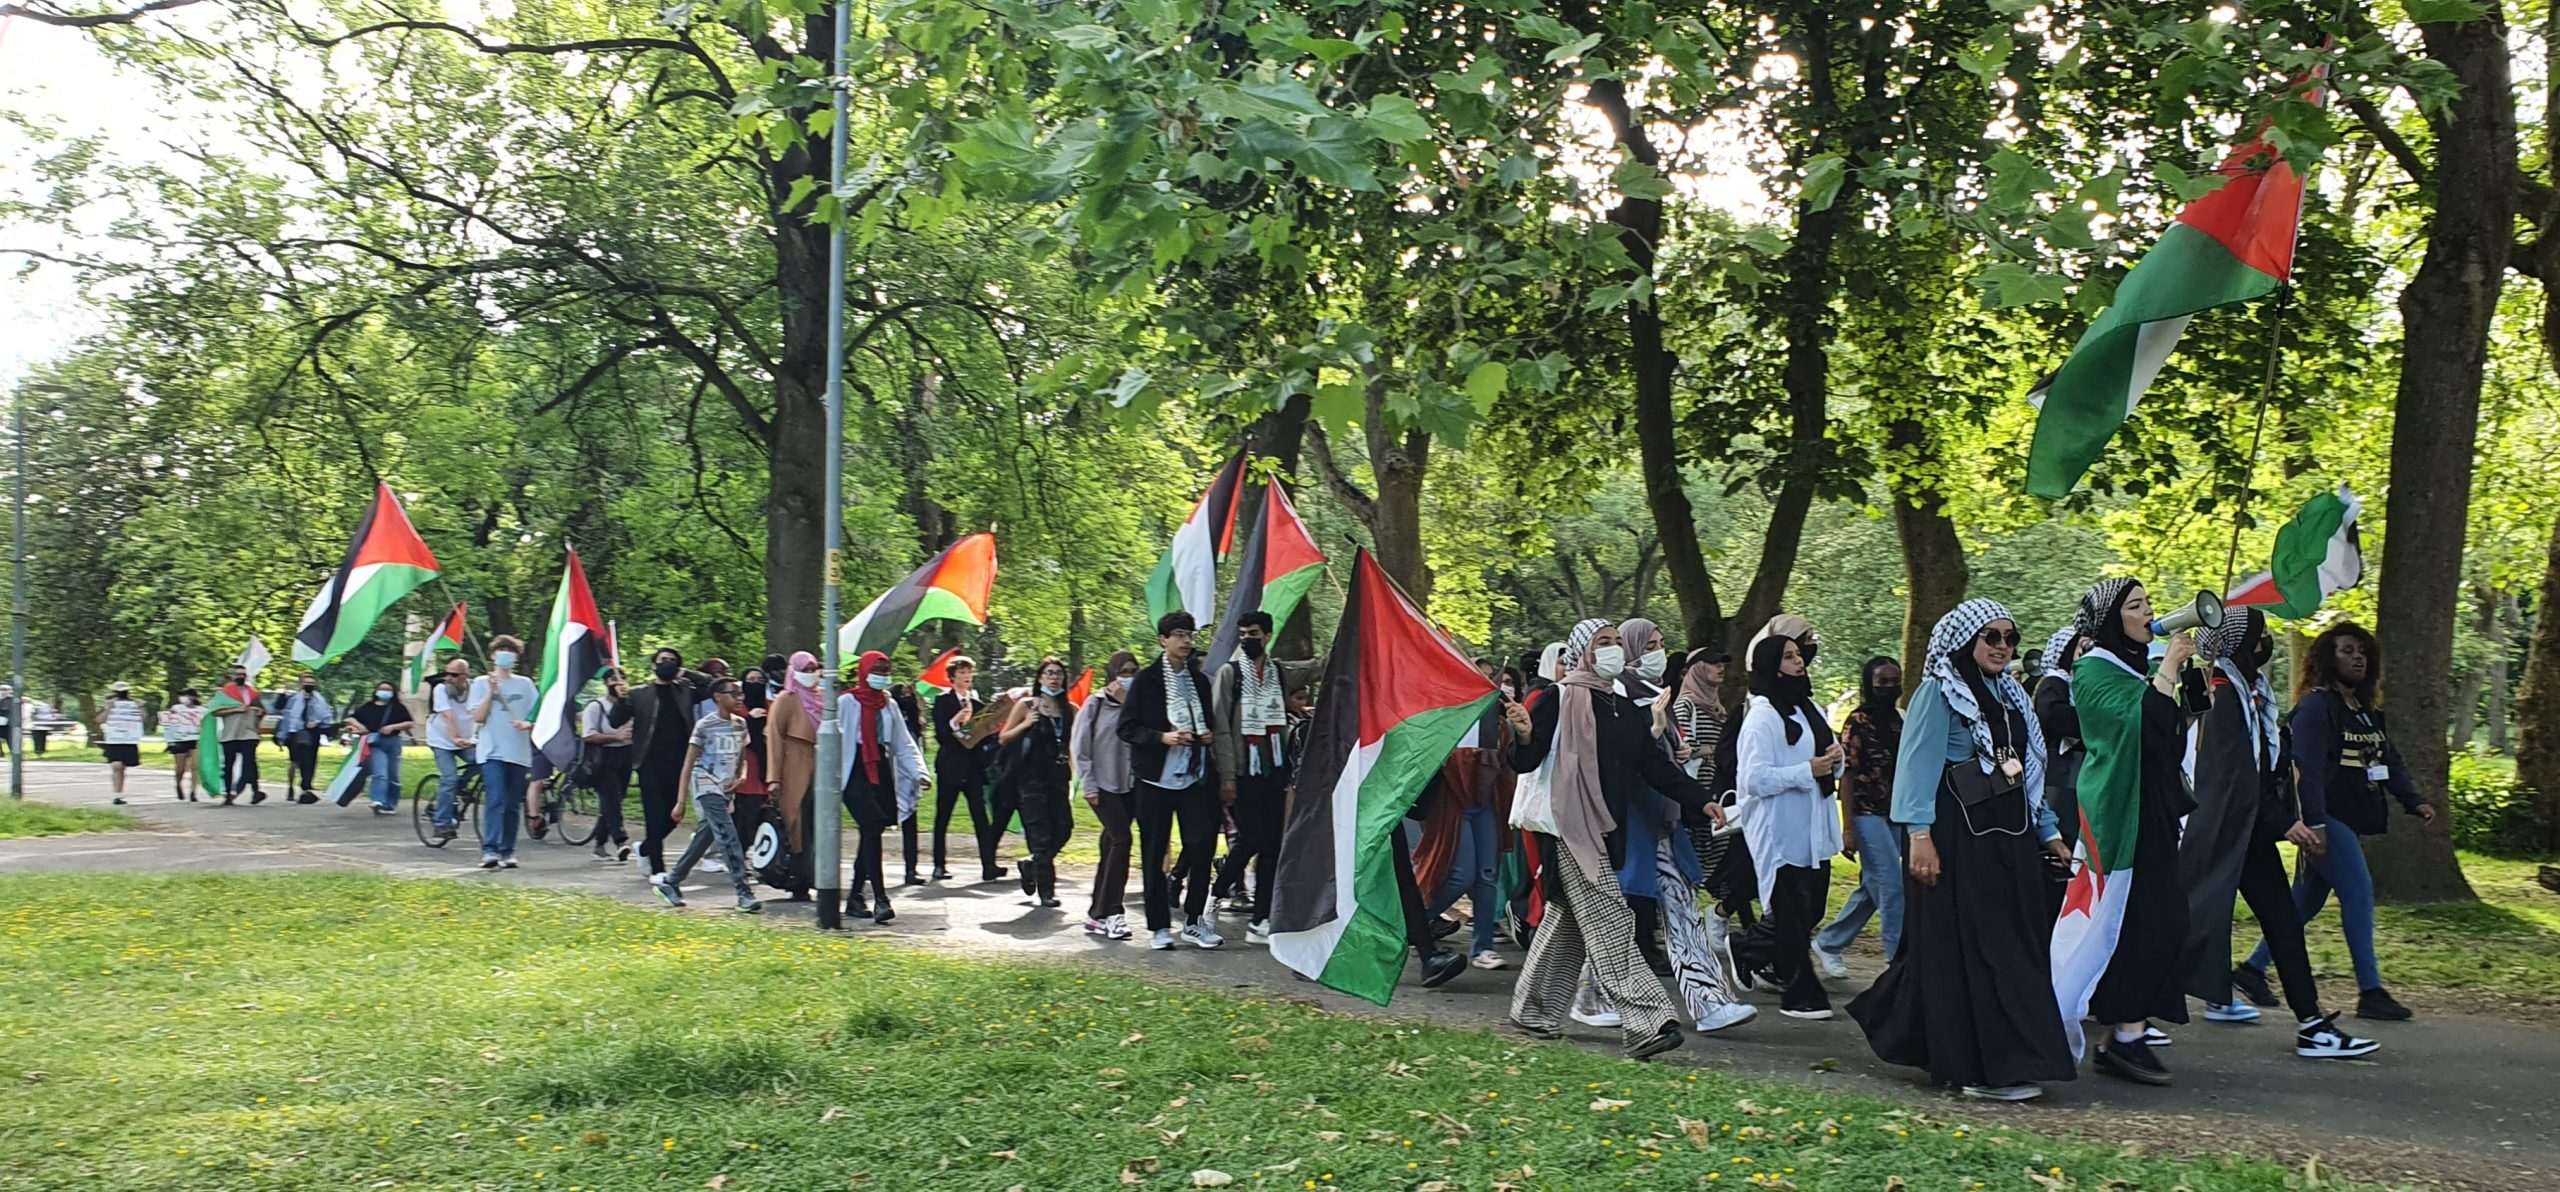 students march through Whitworth park